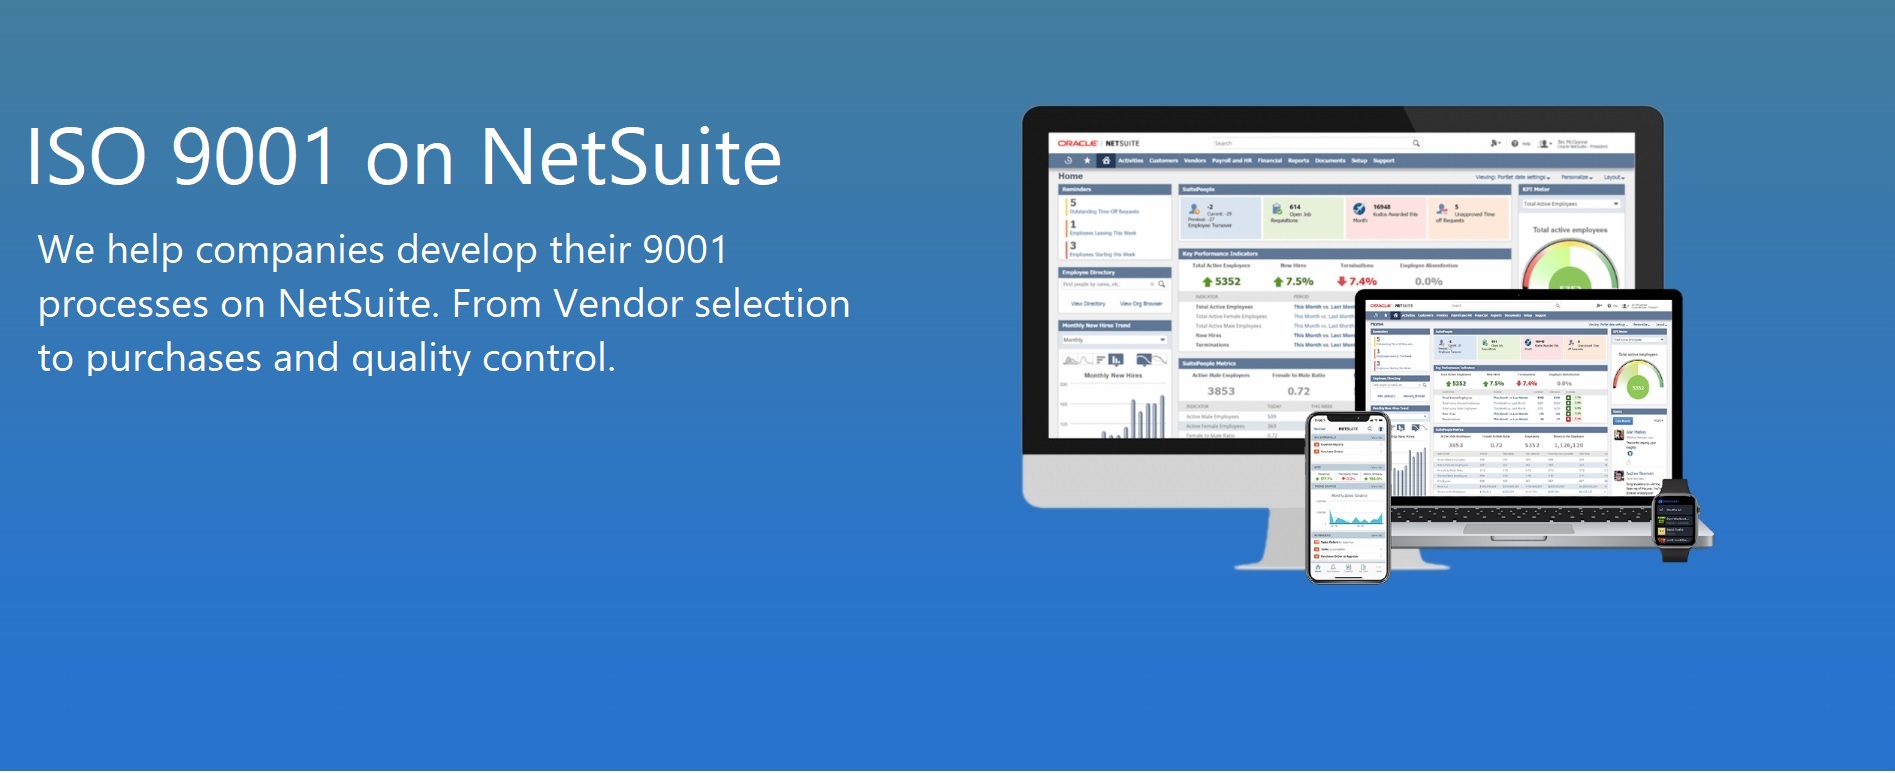 caw netsuite iso 9001